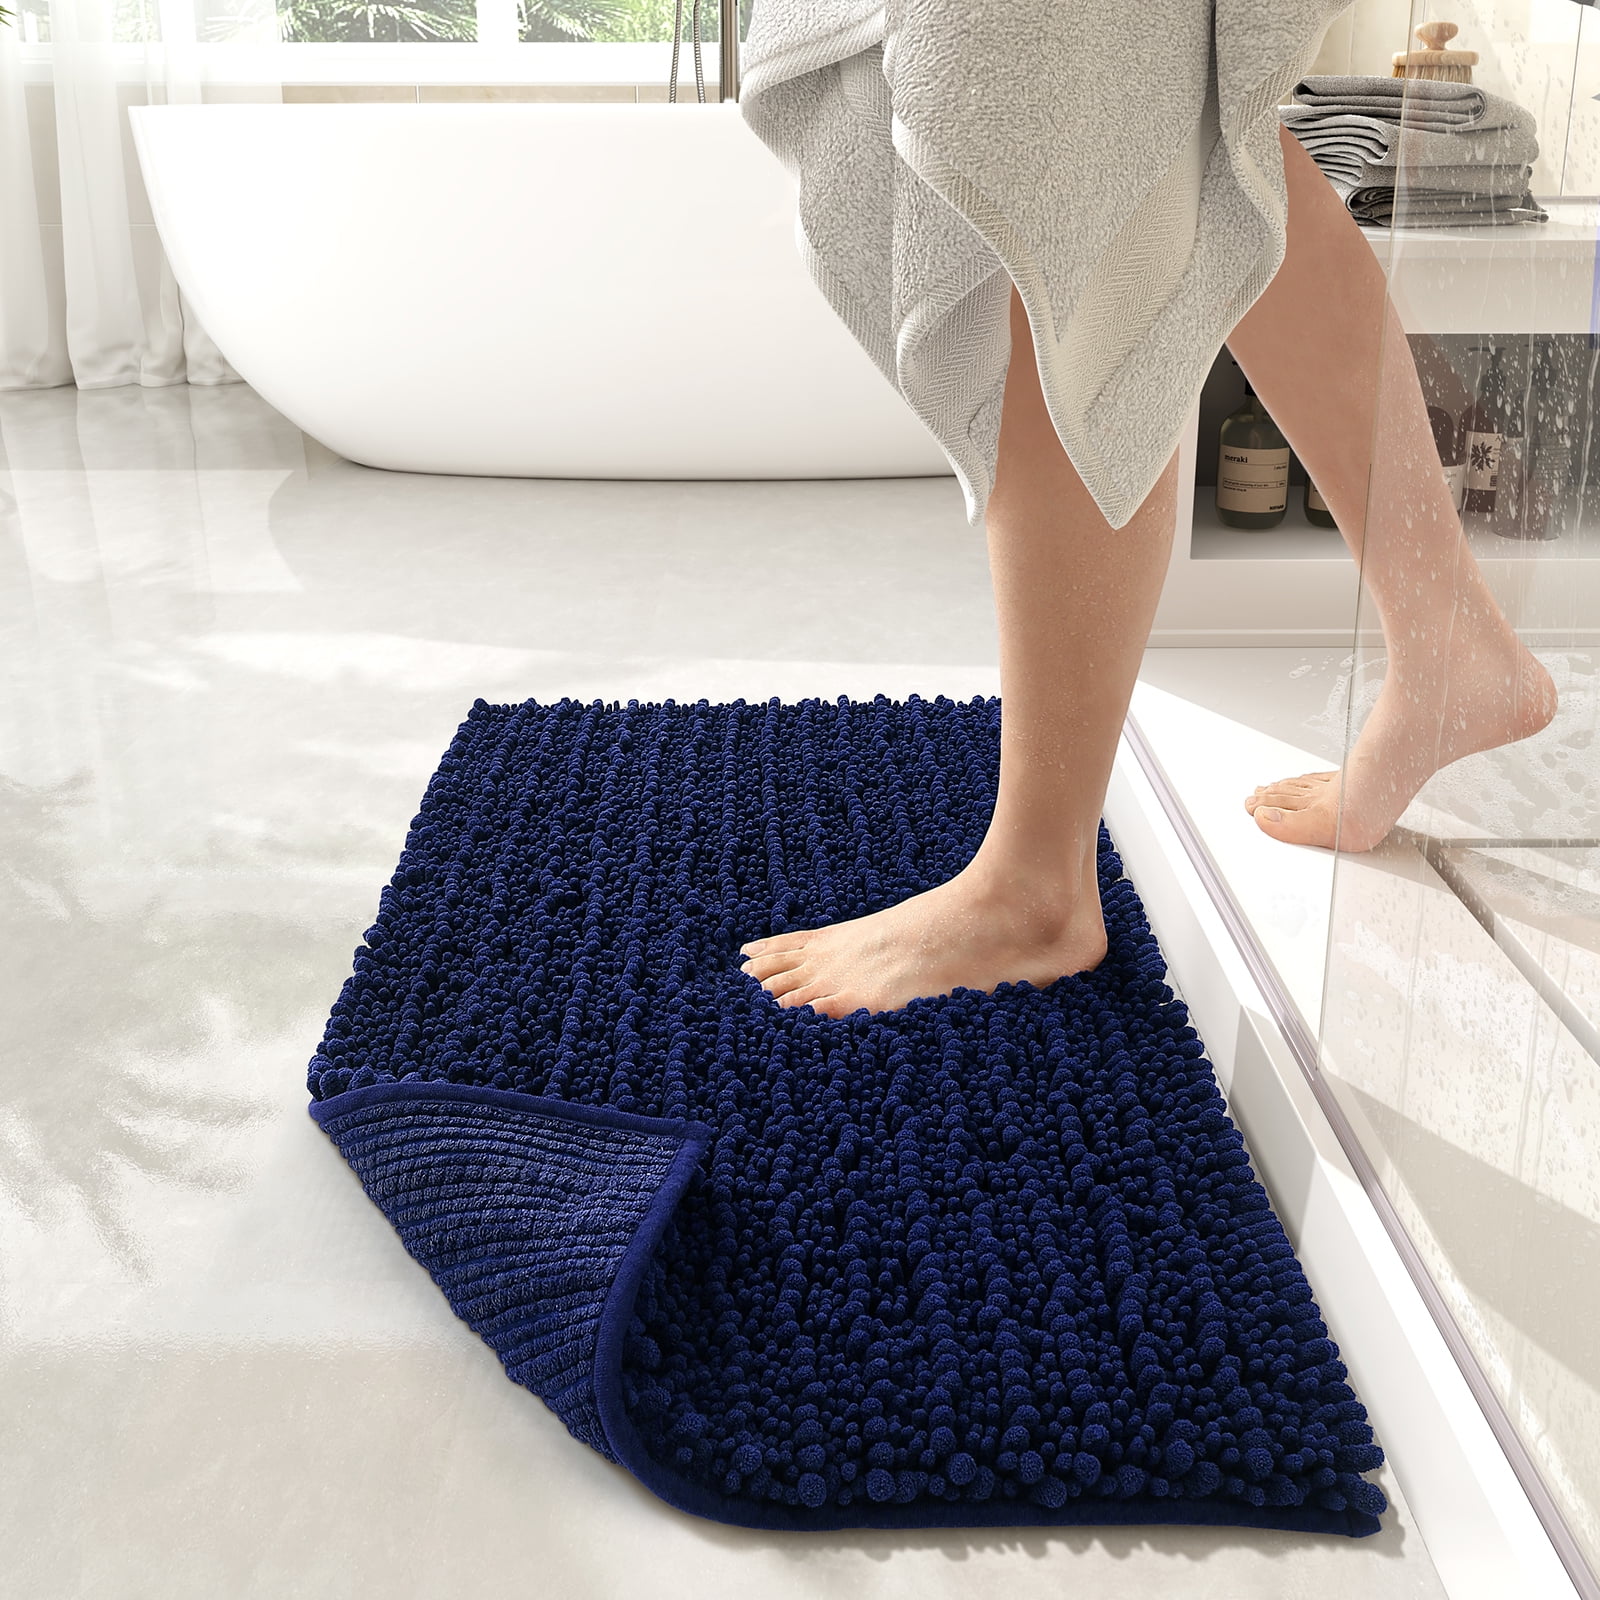 Color&Geometry White Bathroom Rugs - Absorbent, Non Slip, Soft, Washable,  Quick Dry, 16x24 Small White Rug White Bath Mats for Bathroom, Microfiber